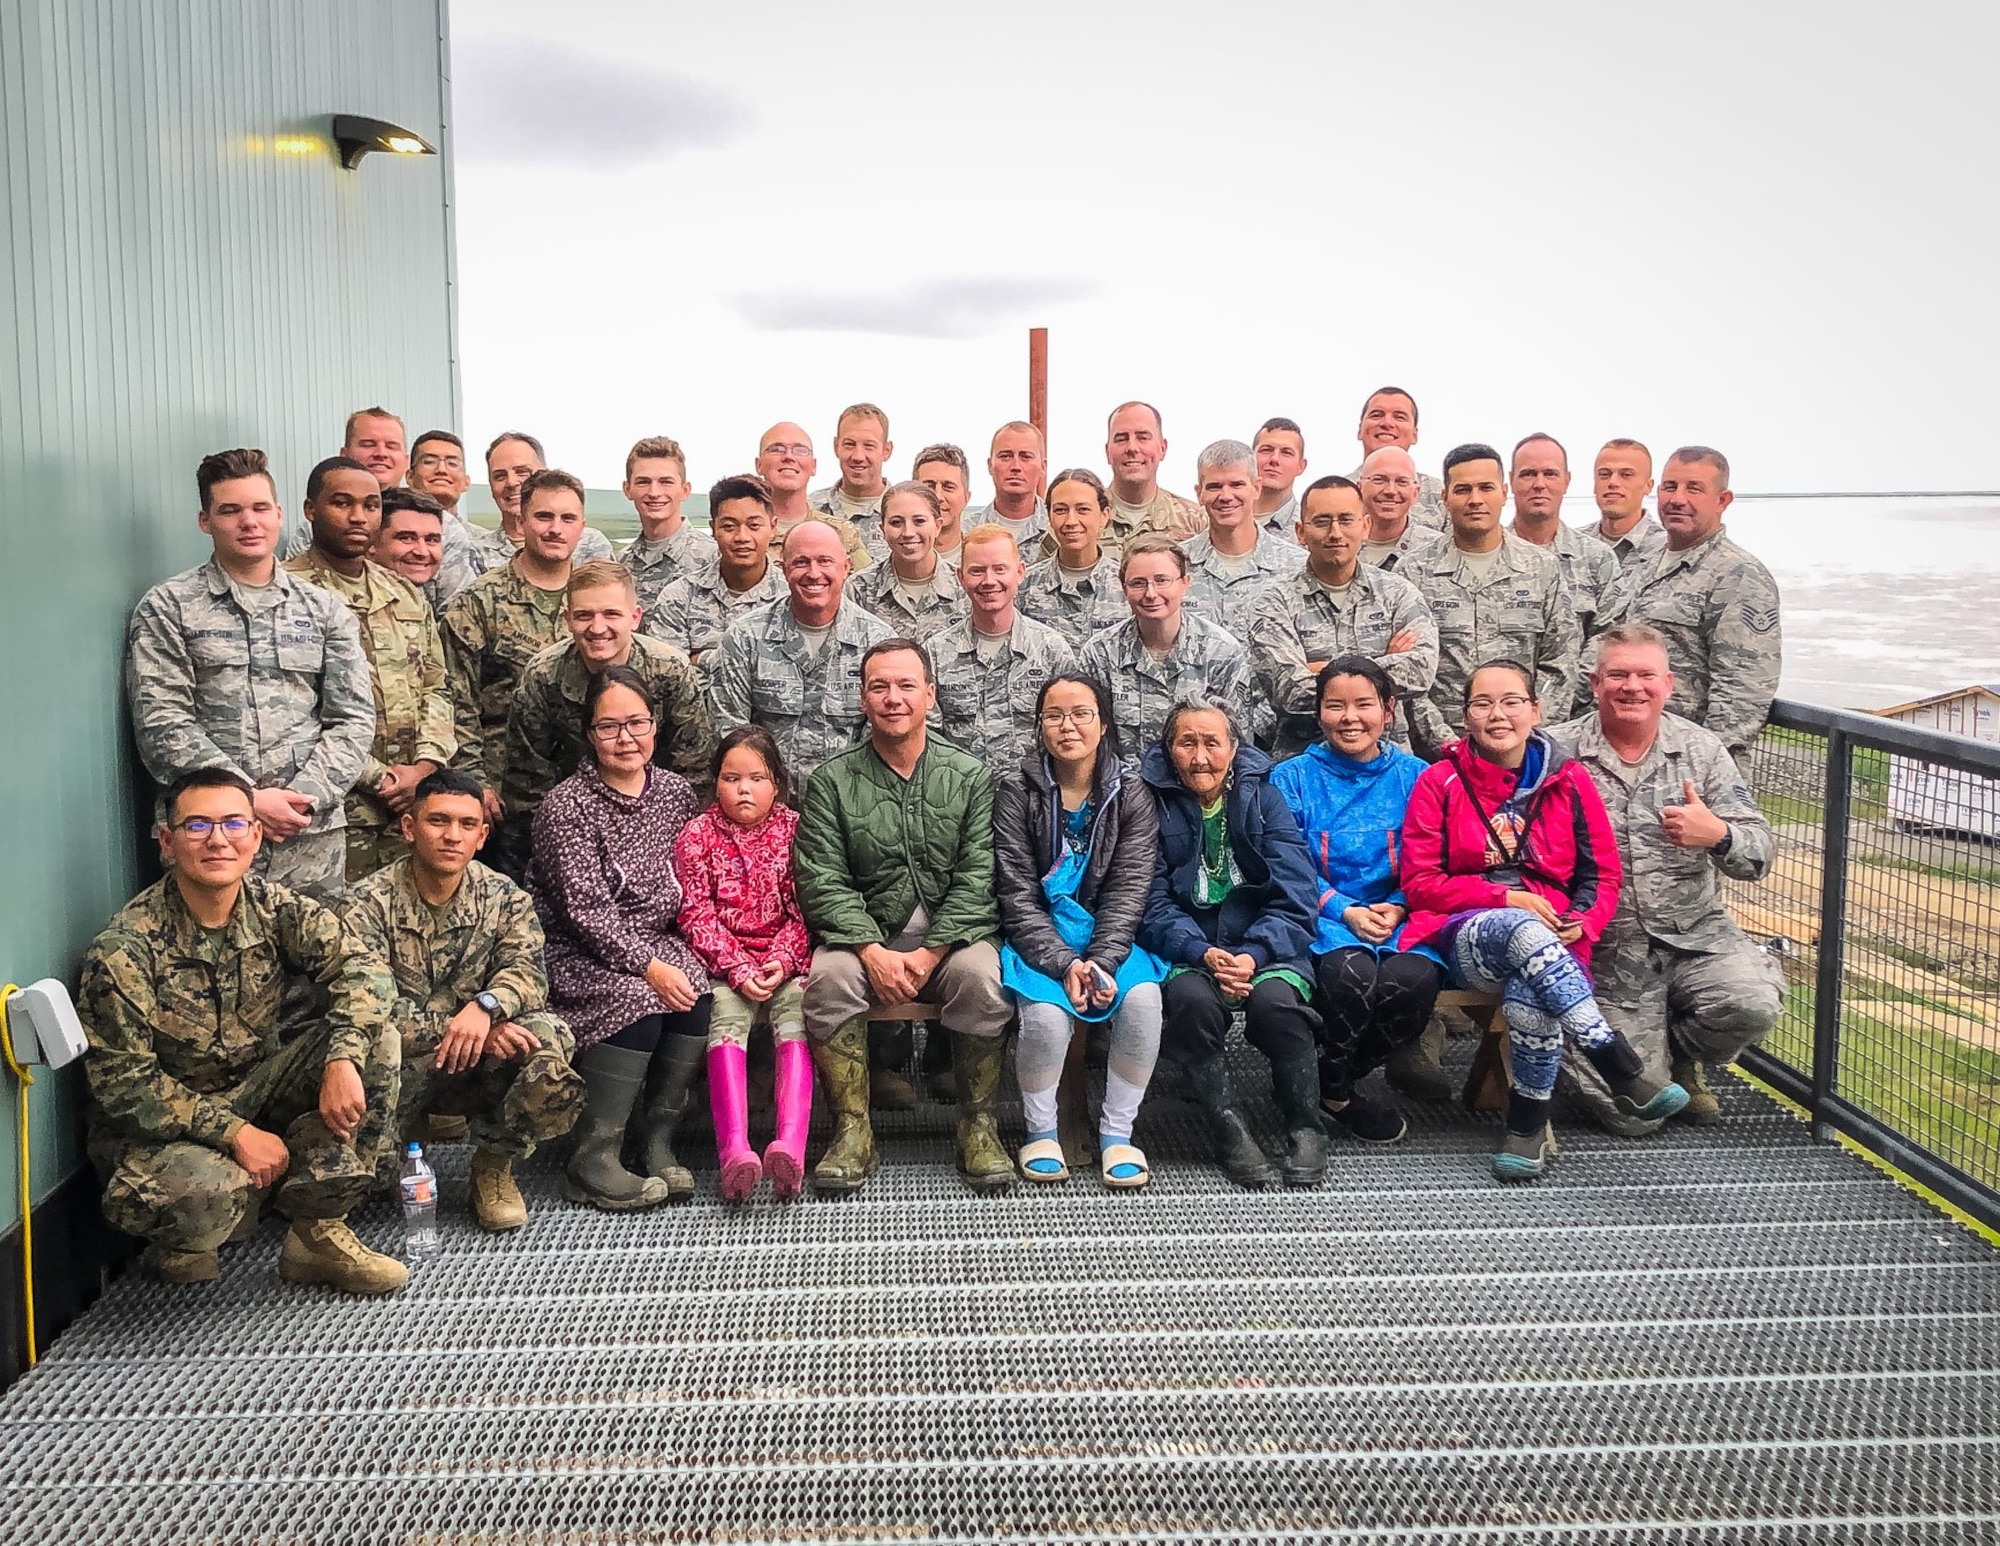 Villagers from Newtok, Alaska, pose with Air Force reservists in the 419th Civil Engineer Squadron from Hill Air Force Base, Utah, on Aug. 8.